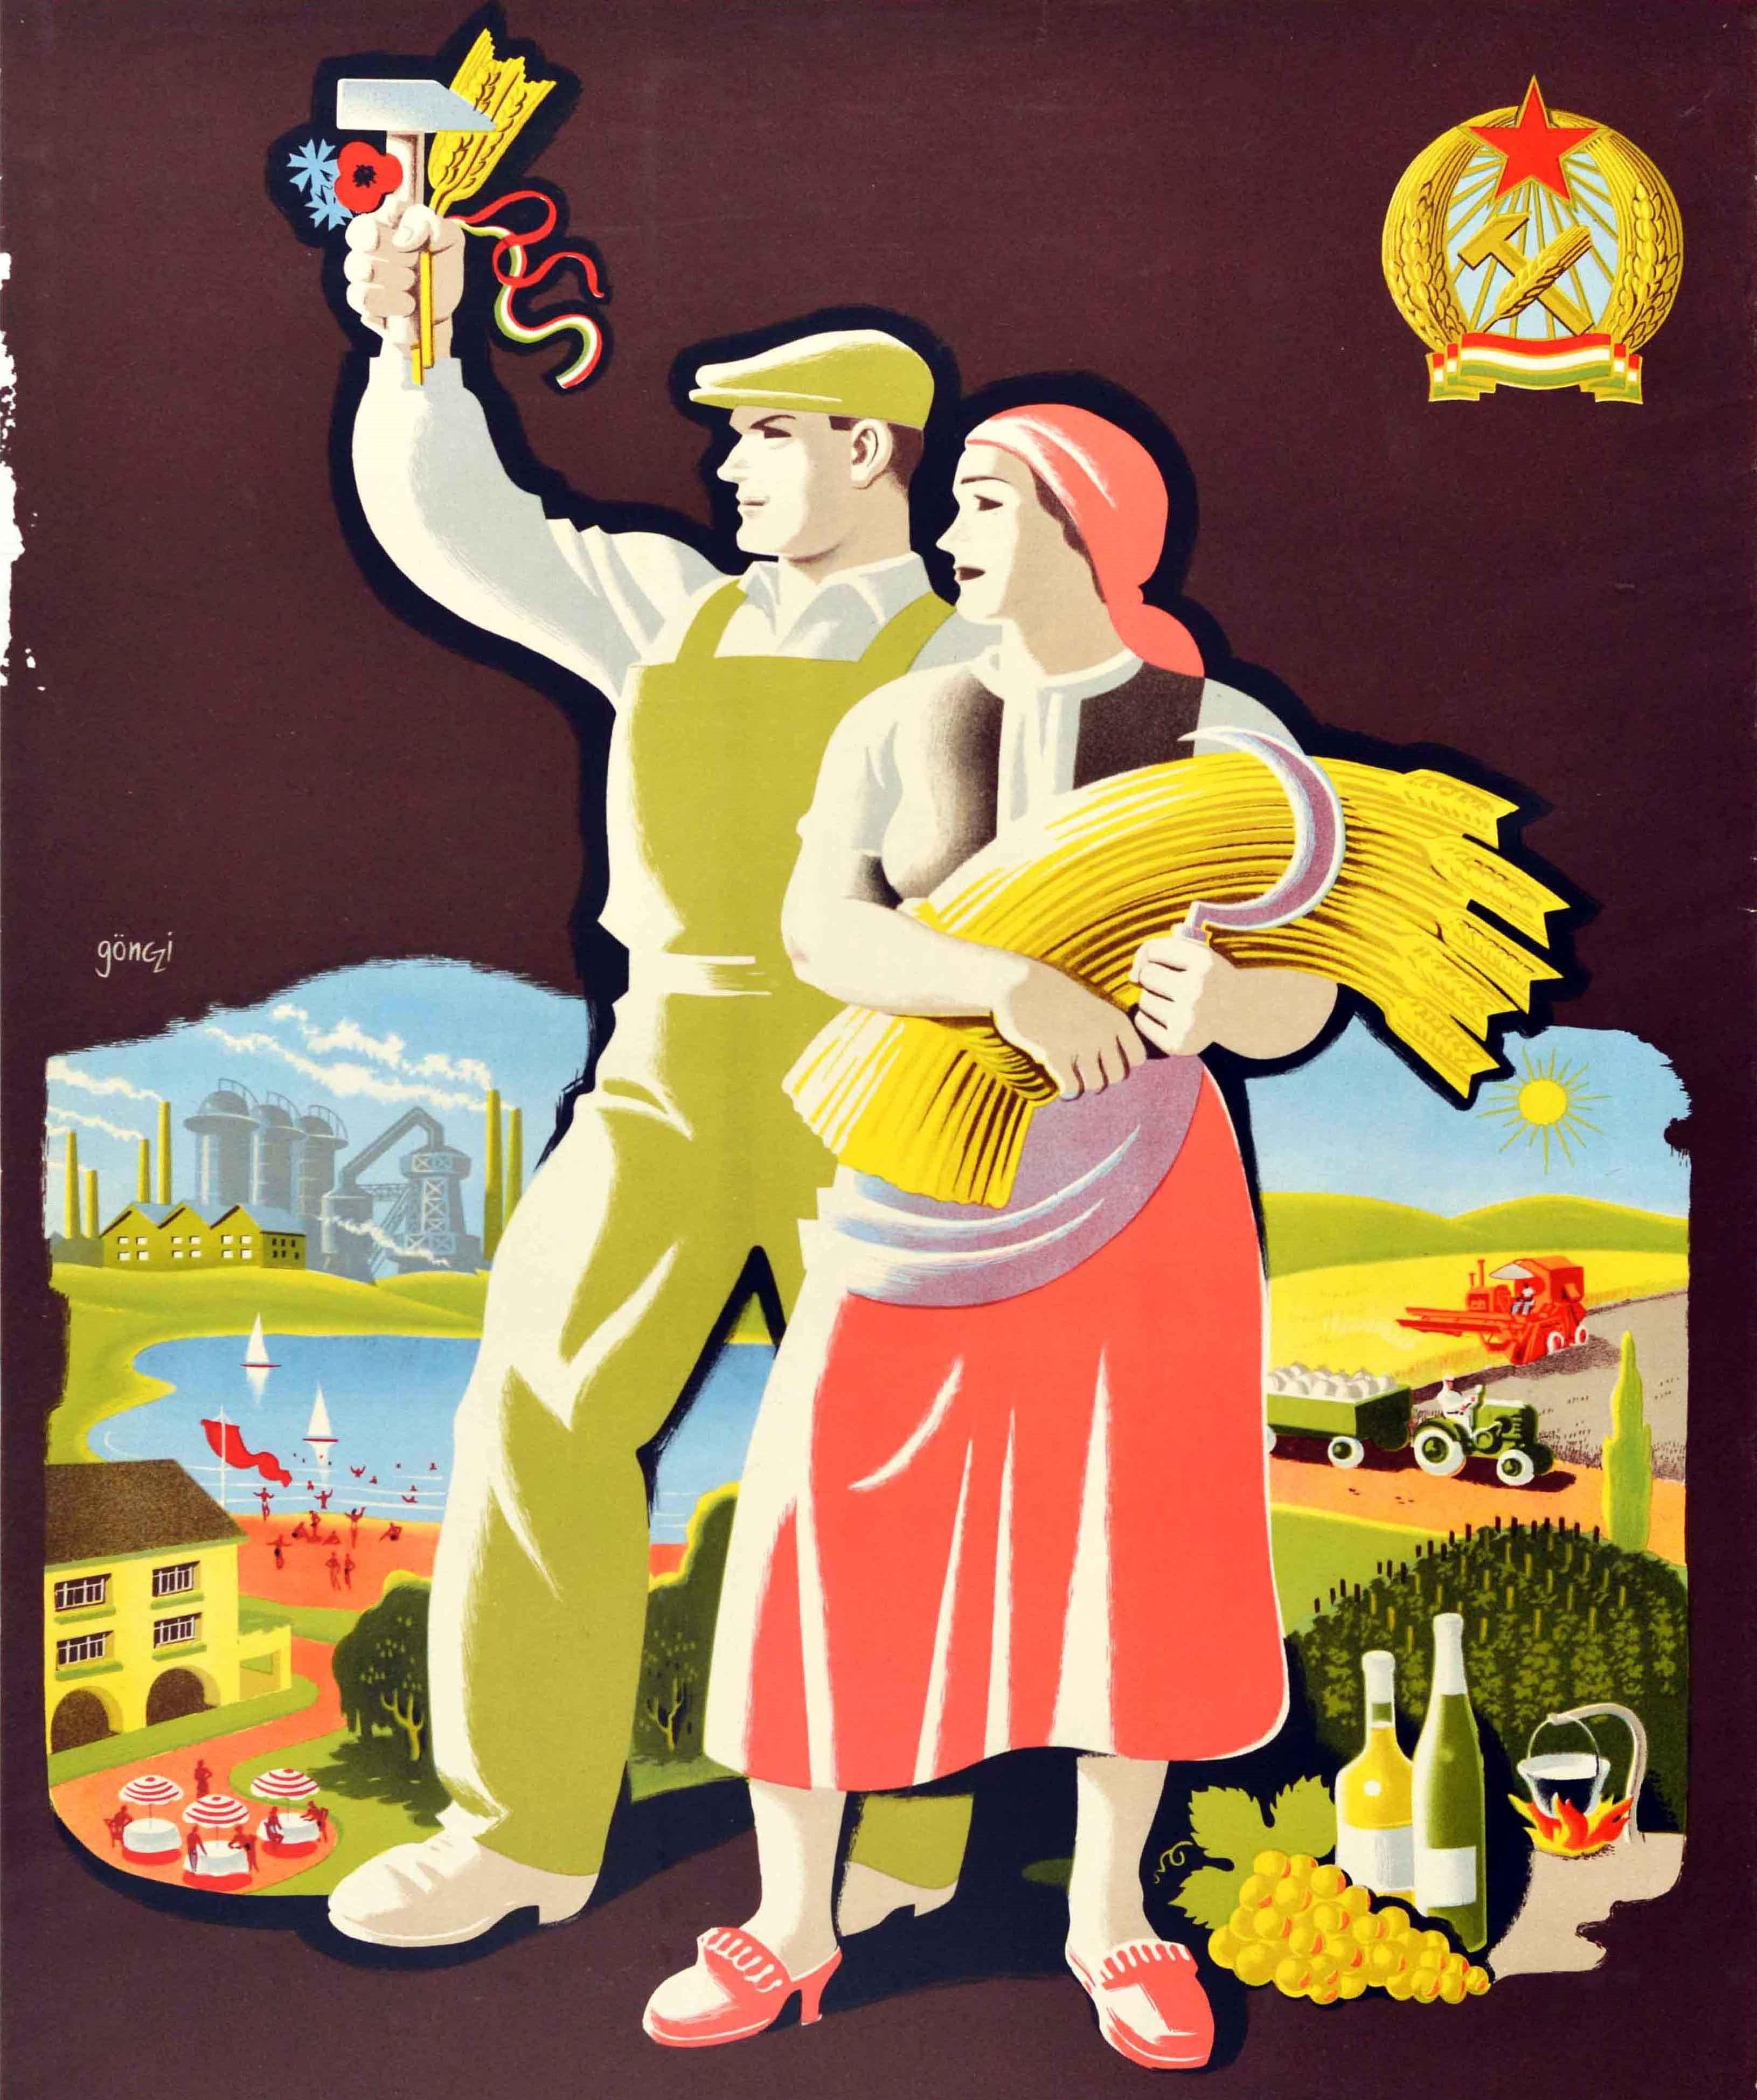 Mid-20th Century Original Vintage Travel Poster Hongrie Hungary Wine Industry Agriculture Tourism